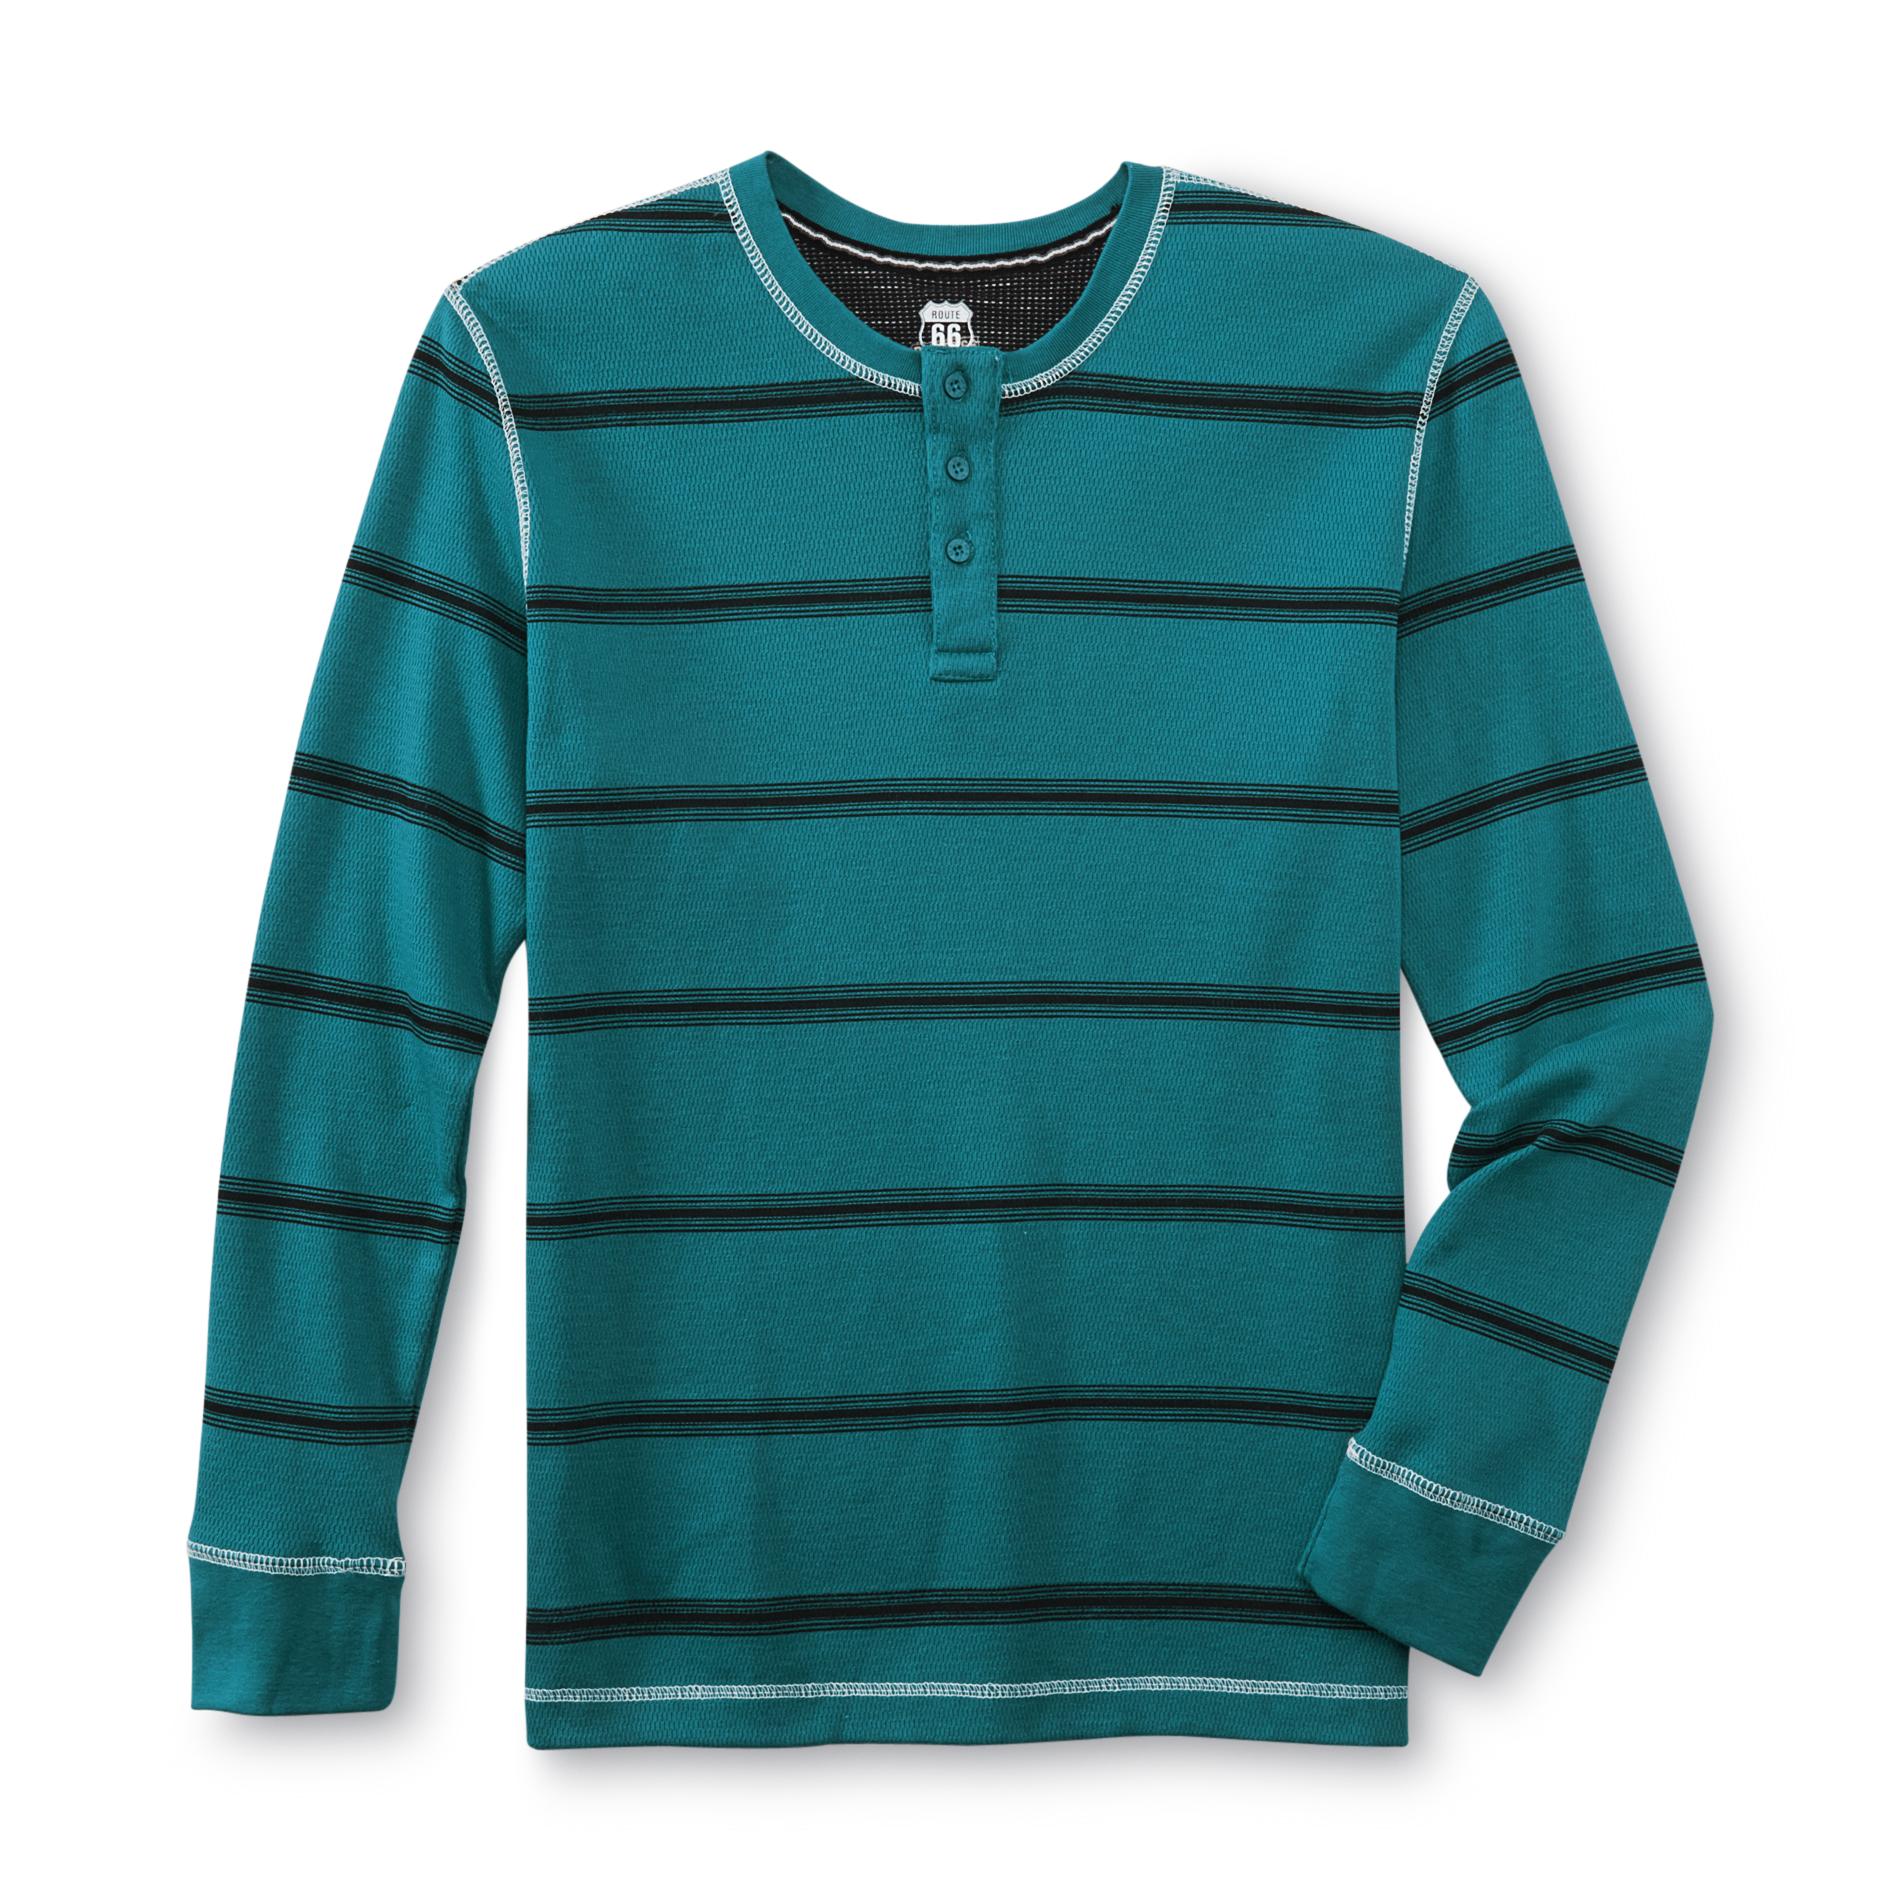 Route 66 Men's Thermal Henley Shirt - Striped